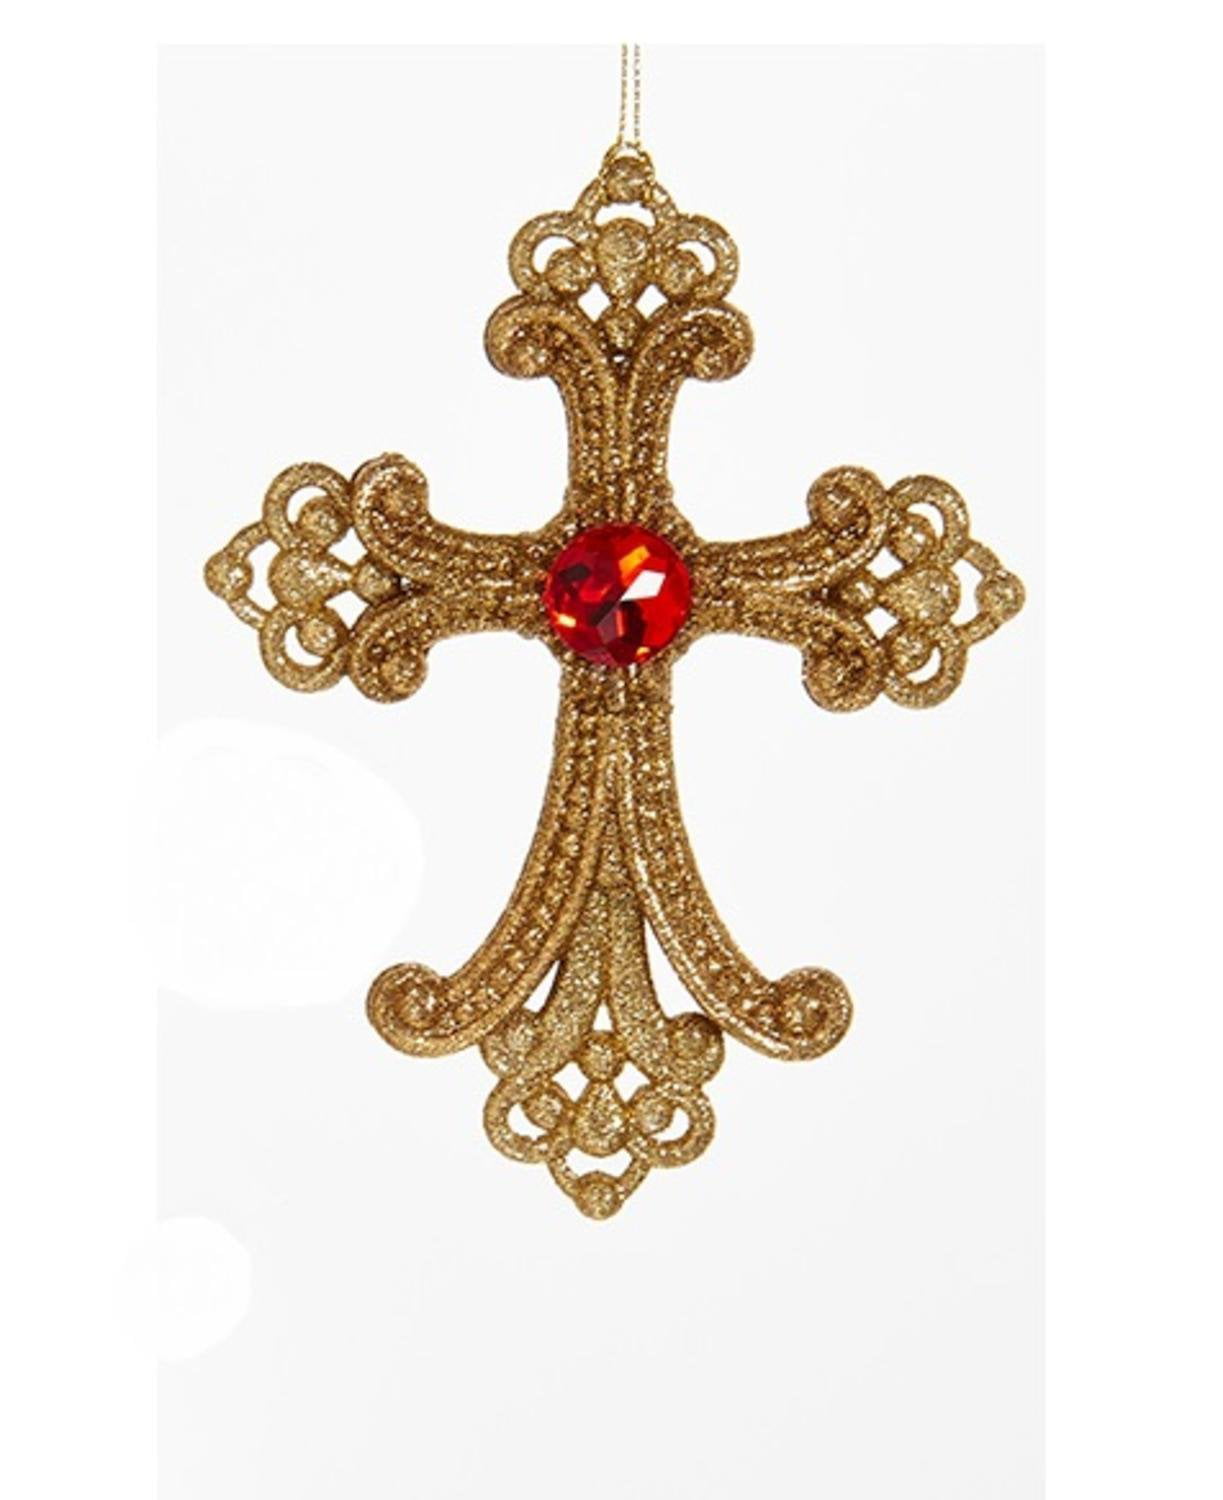 Details about   Ornate Gold Jeweled Religious Cross Christmas Ornament Rhinestone Metal 3 Pcs 